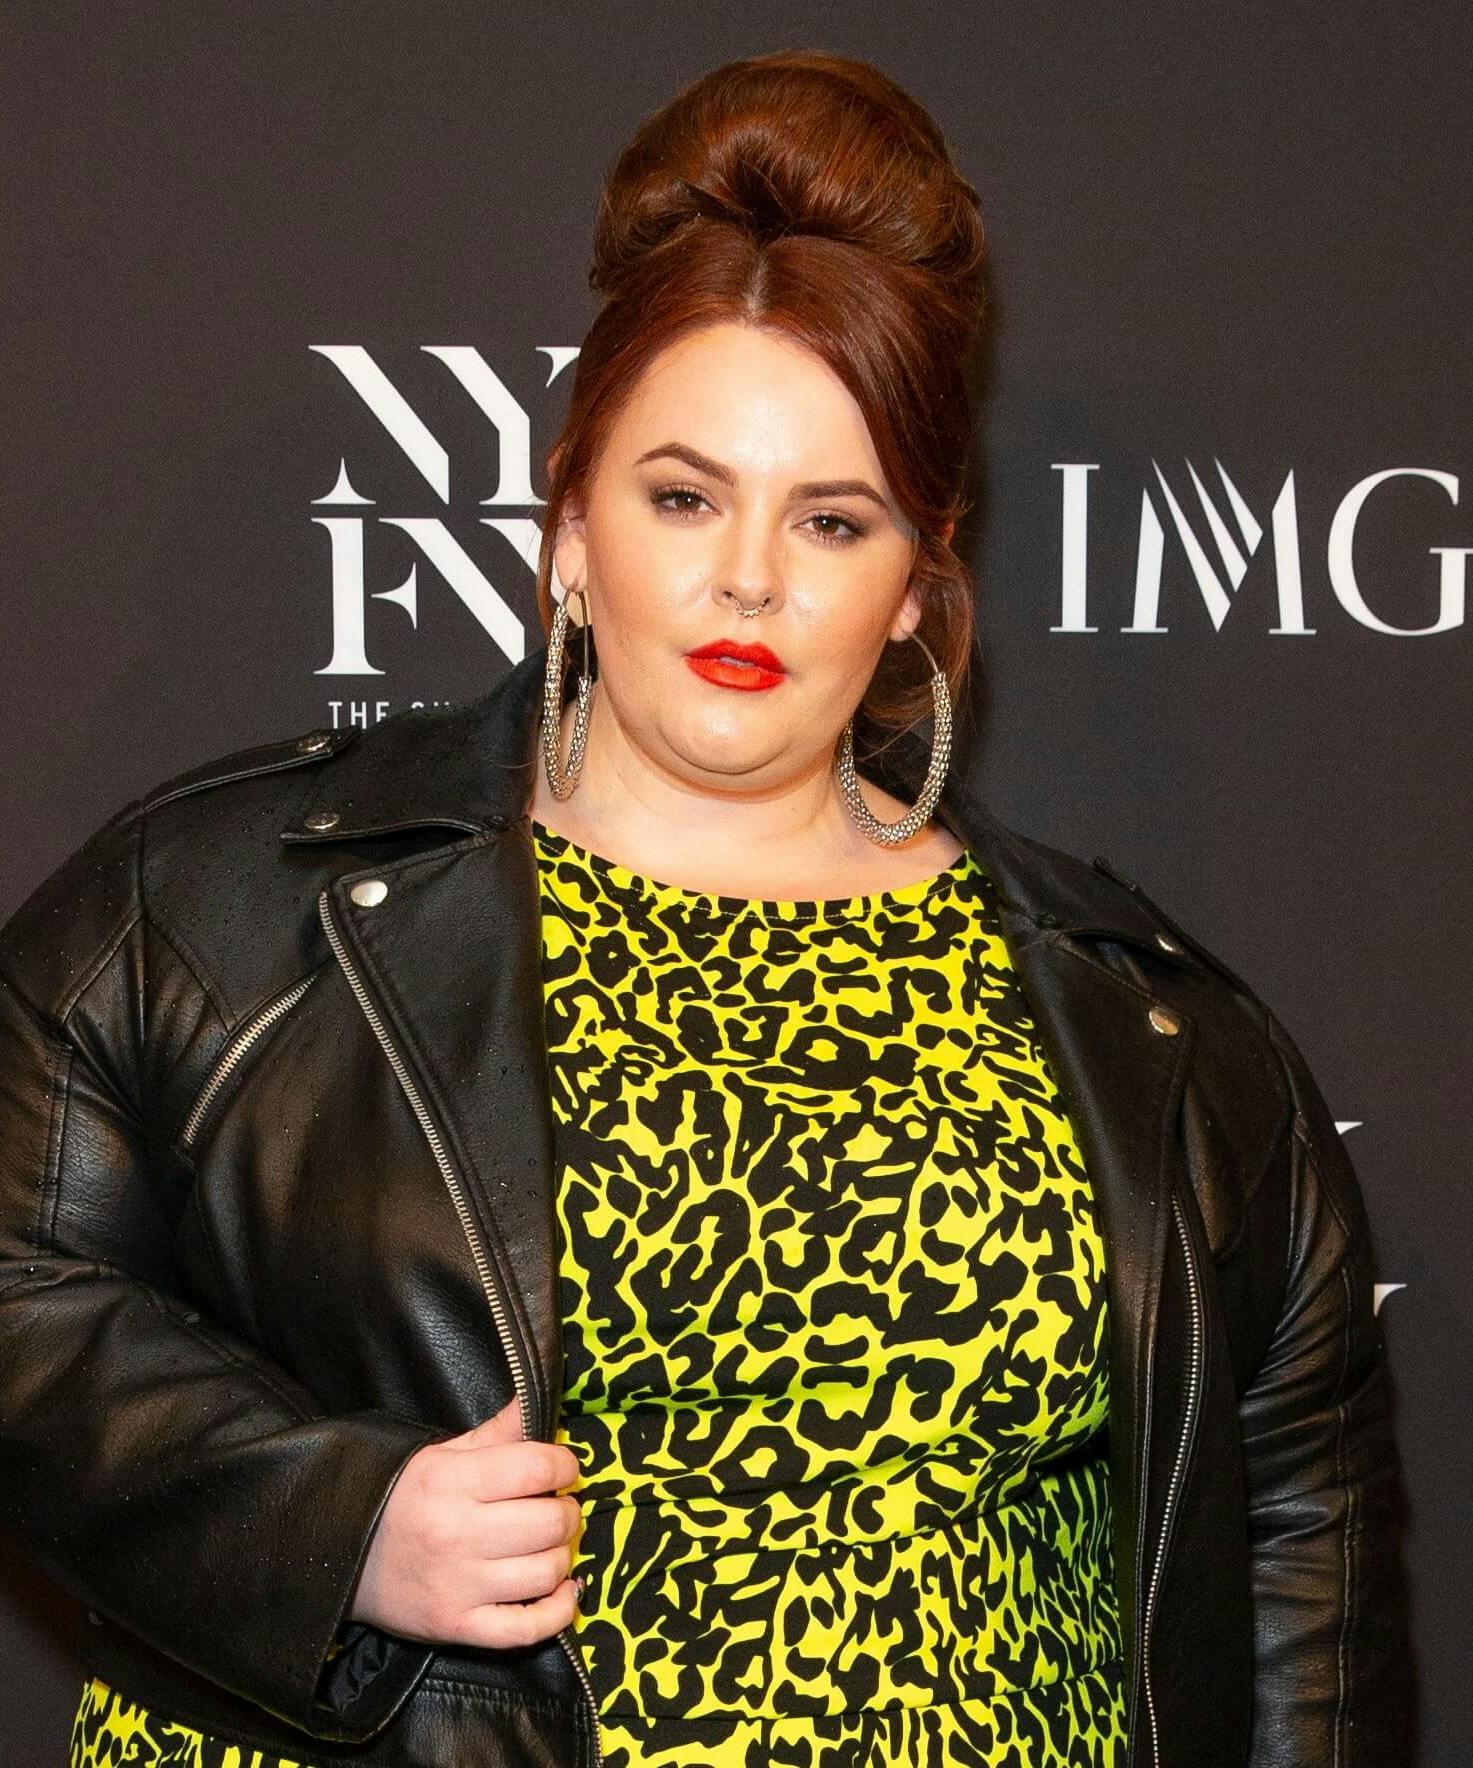 Tess Holliday Reveals She Has Anorexia